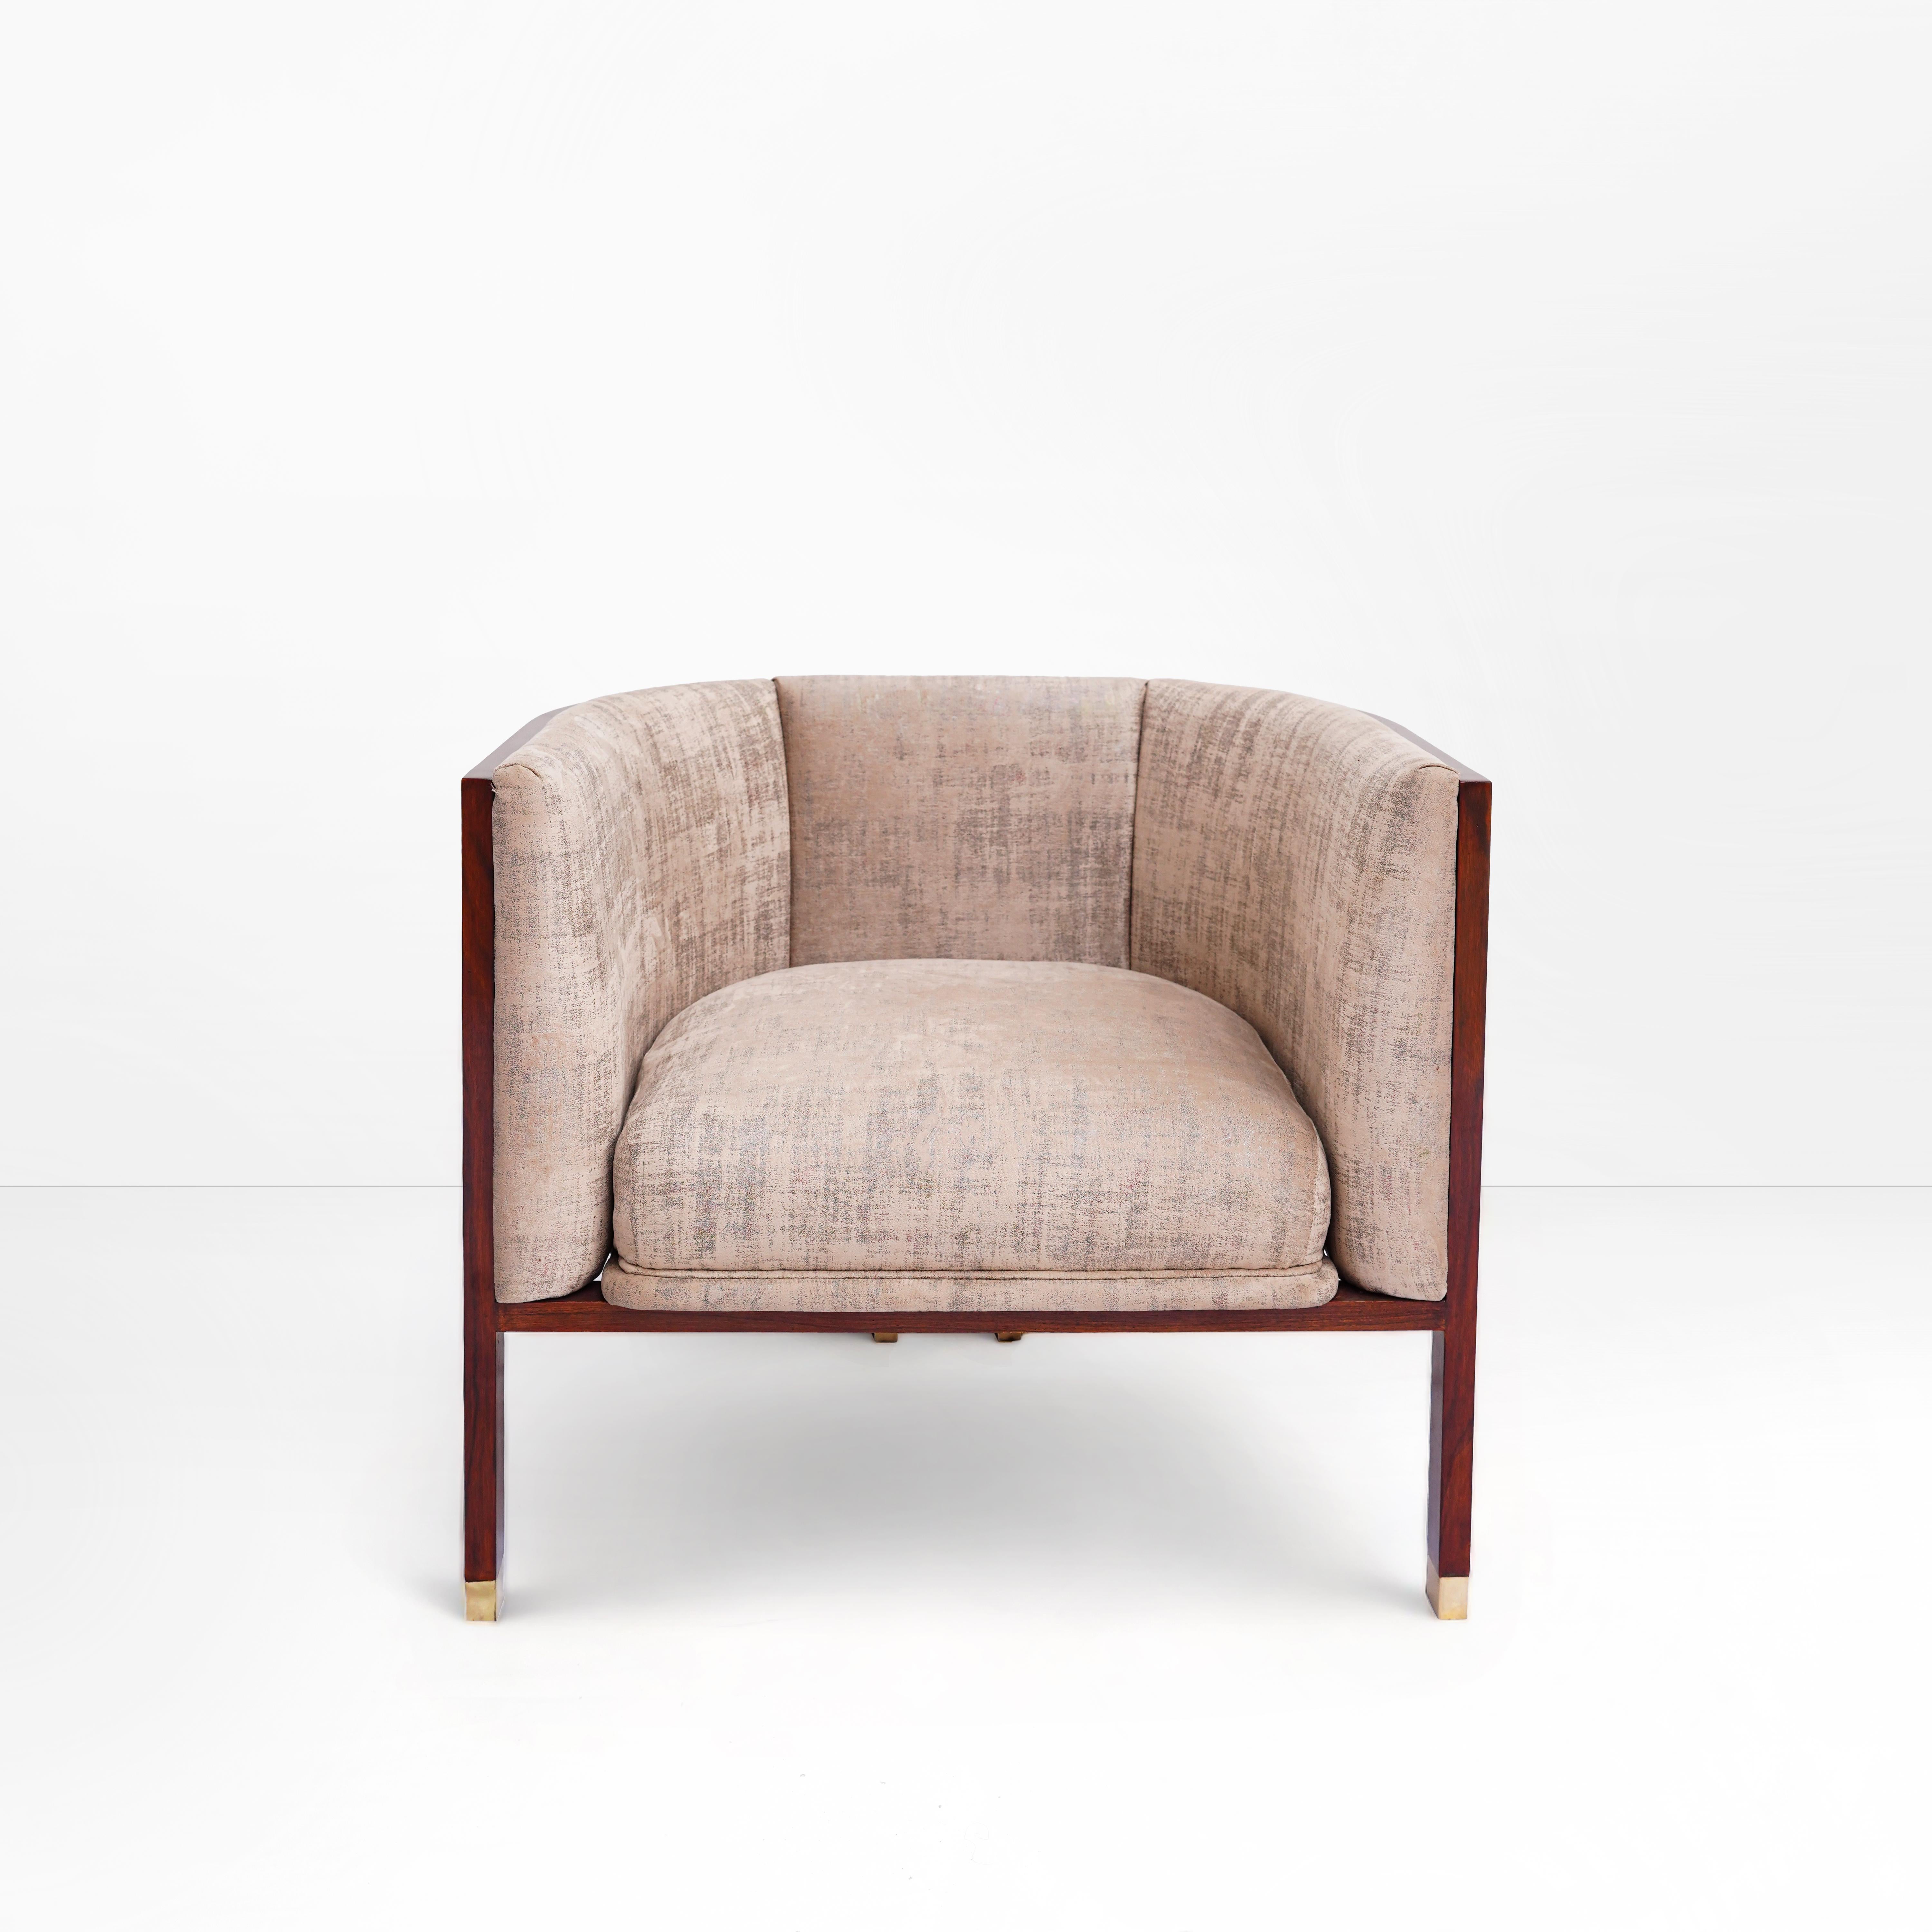 Experience the Timeless Elegance of Erete: A Modern, Bold, Barrel Back Chair with an Original Design

Indulge in the captivating allure of Erete, a bold and exquisitely crafted barrel back chair that seamlessly marries mid-century modern aesthetics